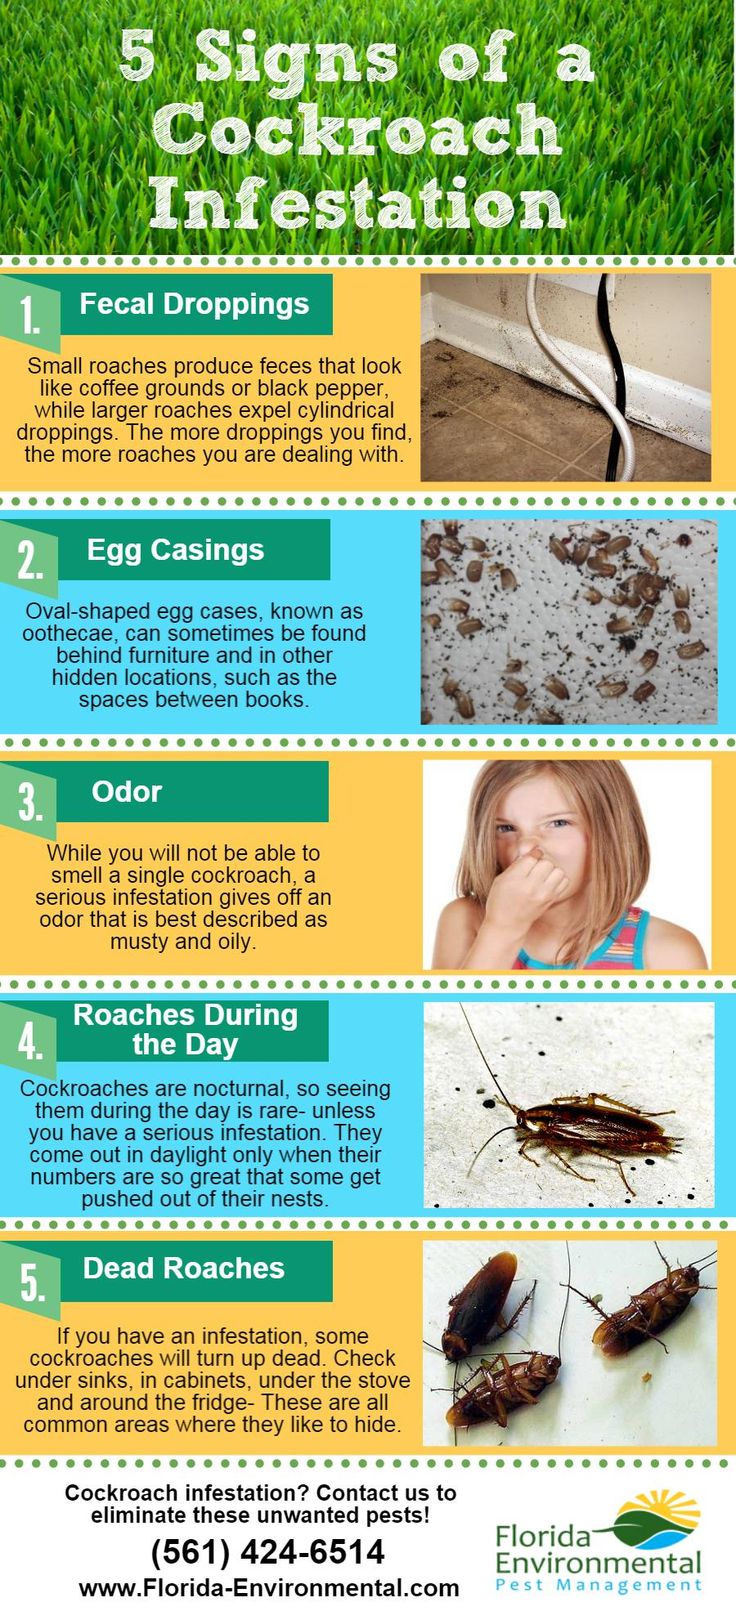 How Do You Know If You Have Cockroaches in Your House?